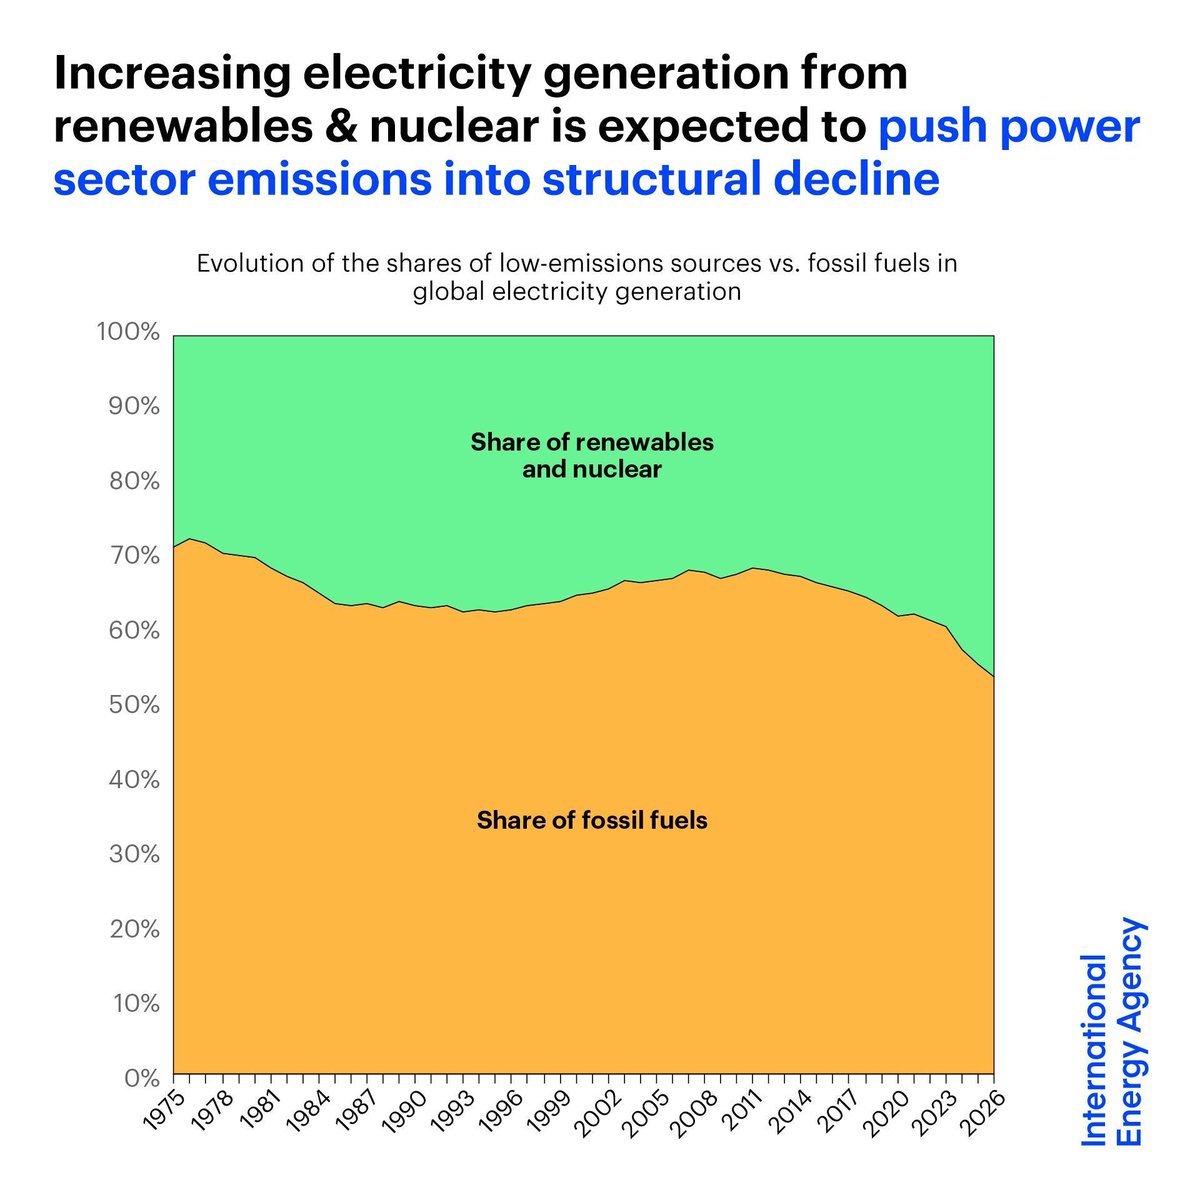 Low-emissions sources of electricity, led by solar, are on track to make up almost half of global generation by 2026, up from just under 40% in 2023 This is expected to push power sector emissions into structural decline in the coming years Read more → iea.li/4bTHHWy